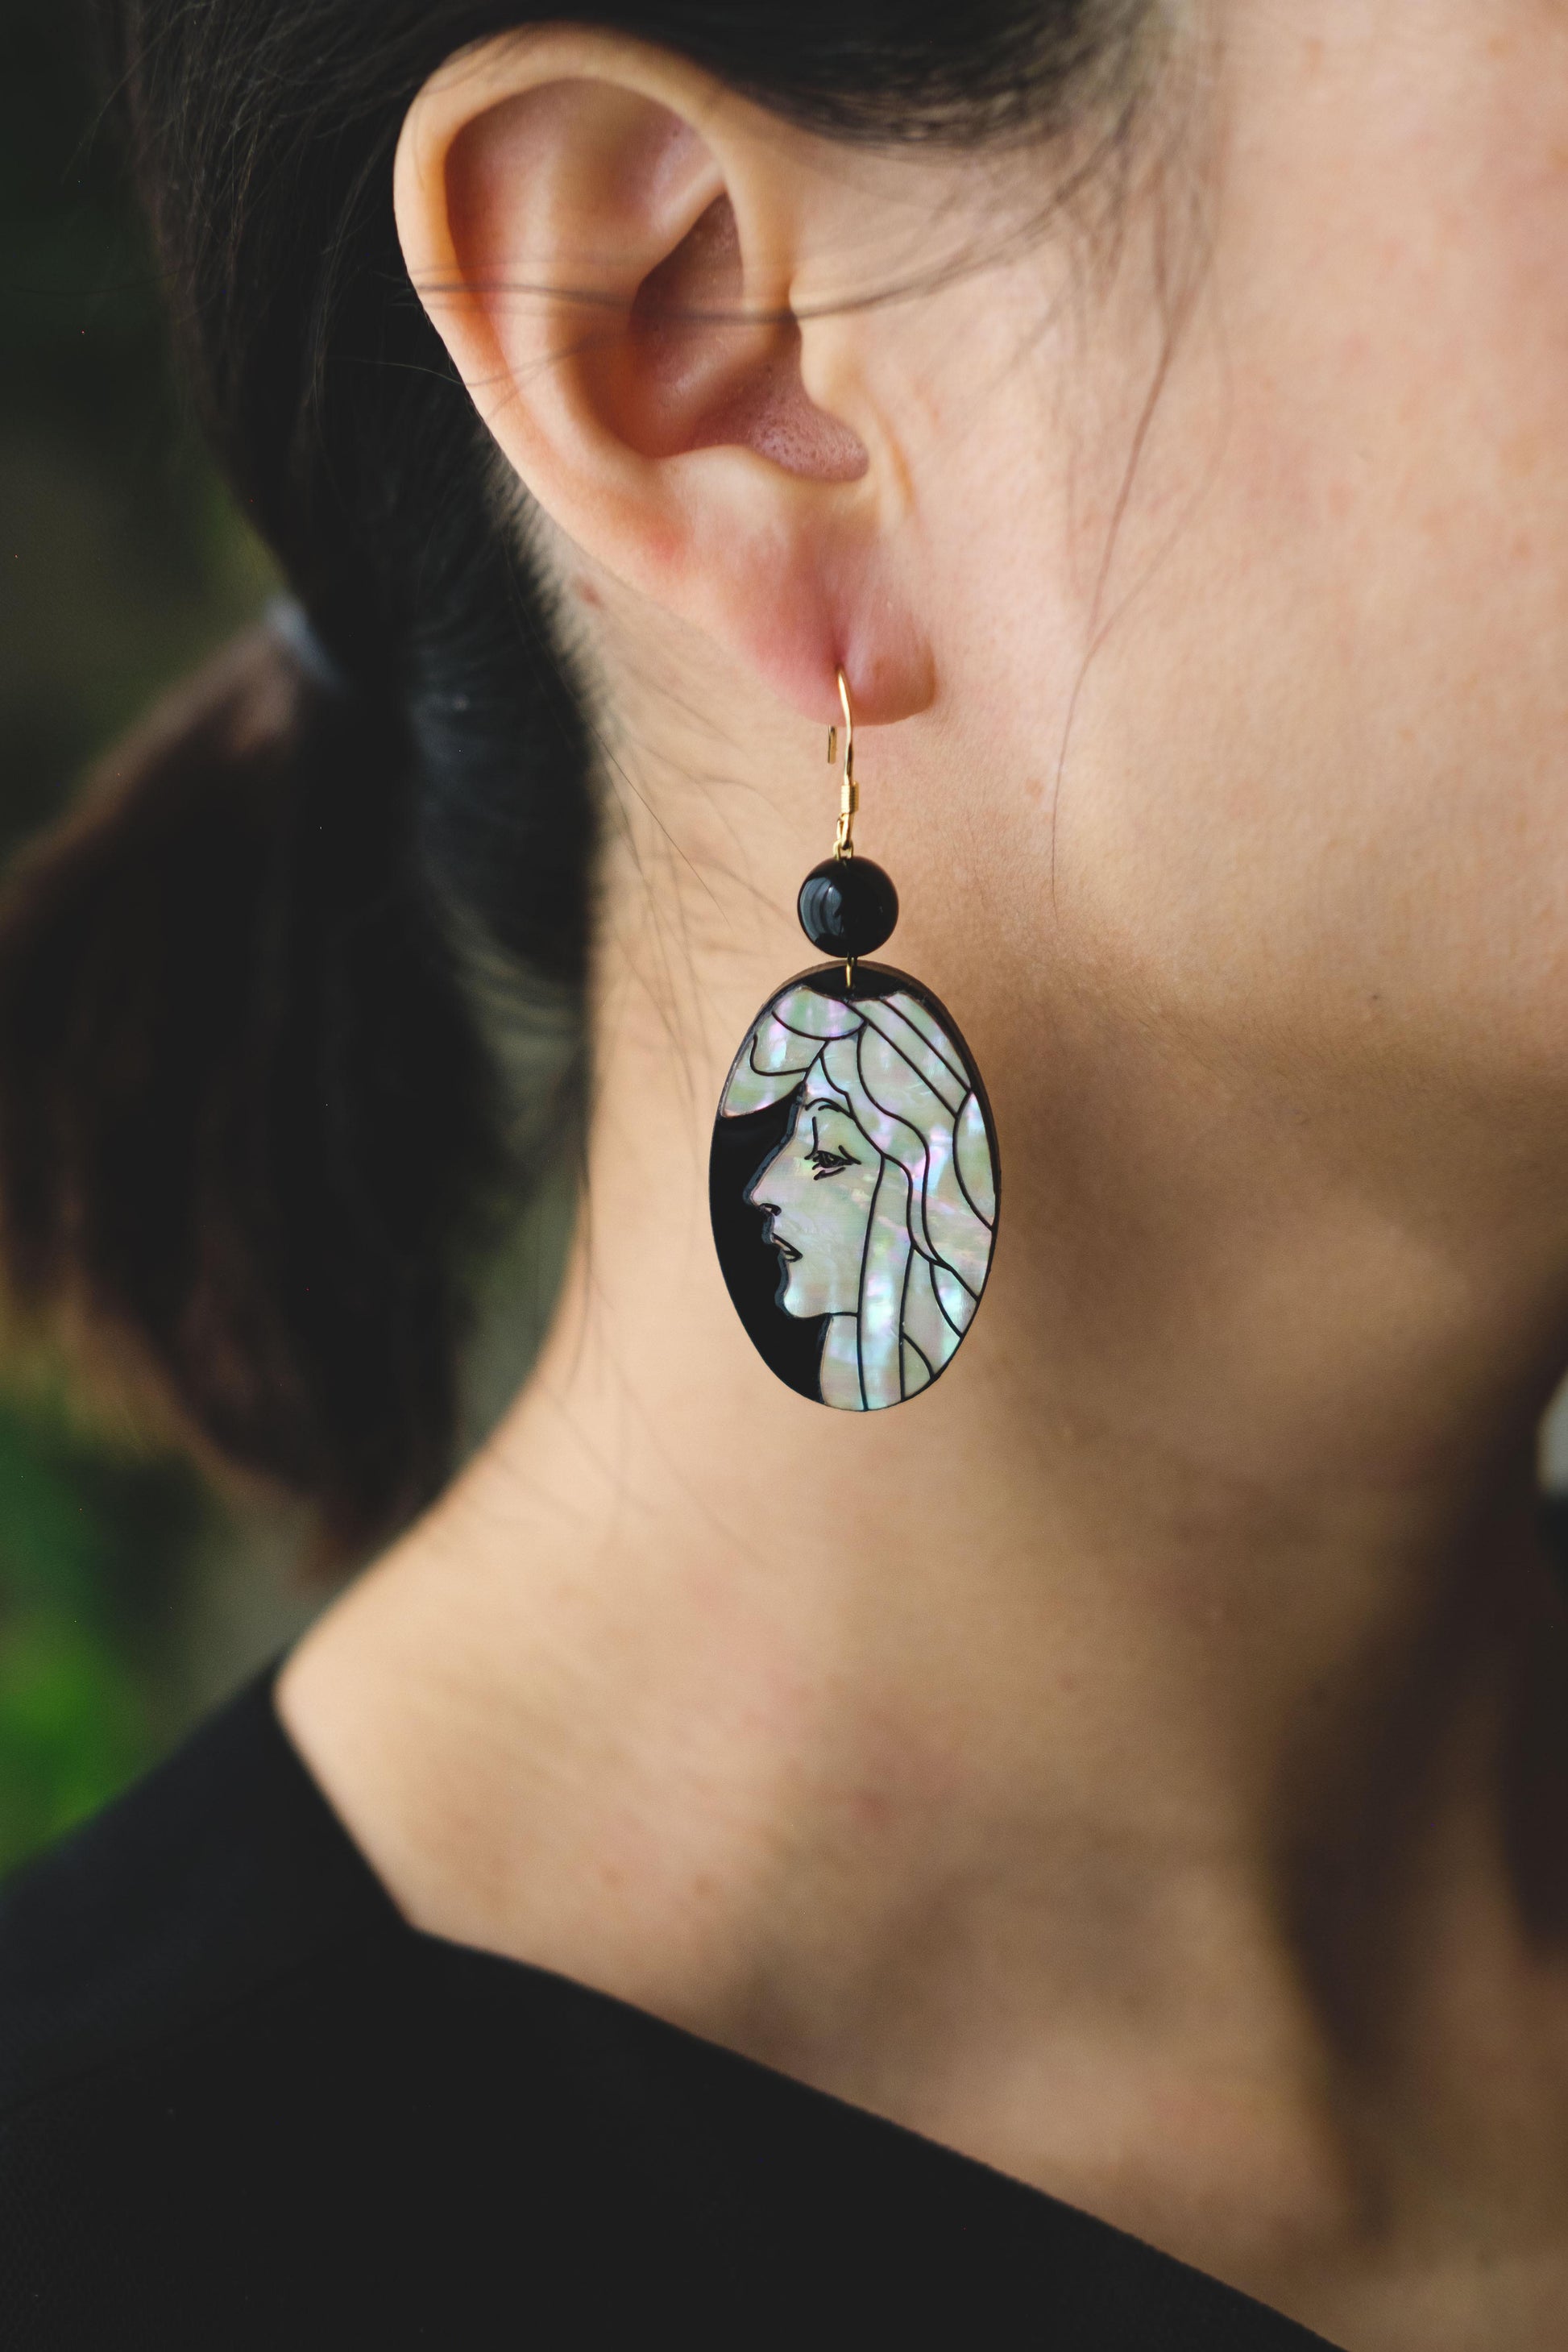 Mother of pearl earrings with engraved portrait of women in art nouveau style..